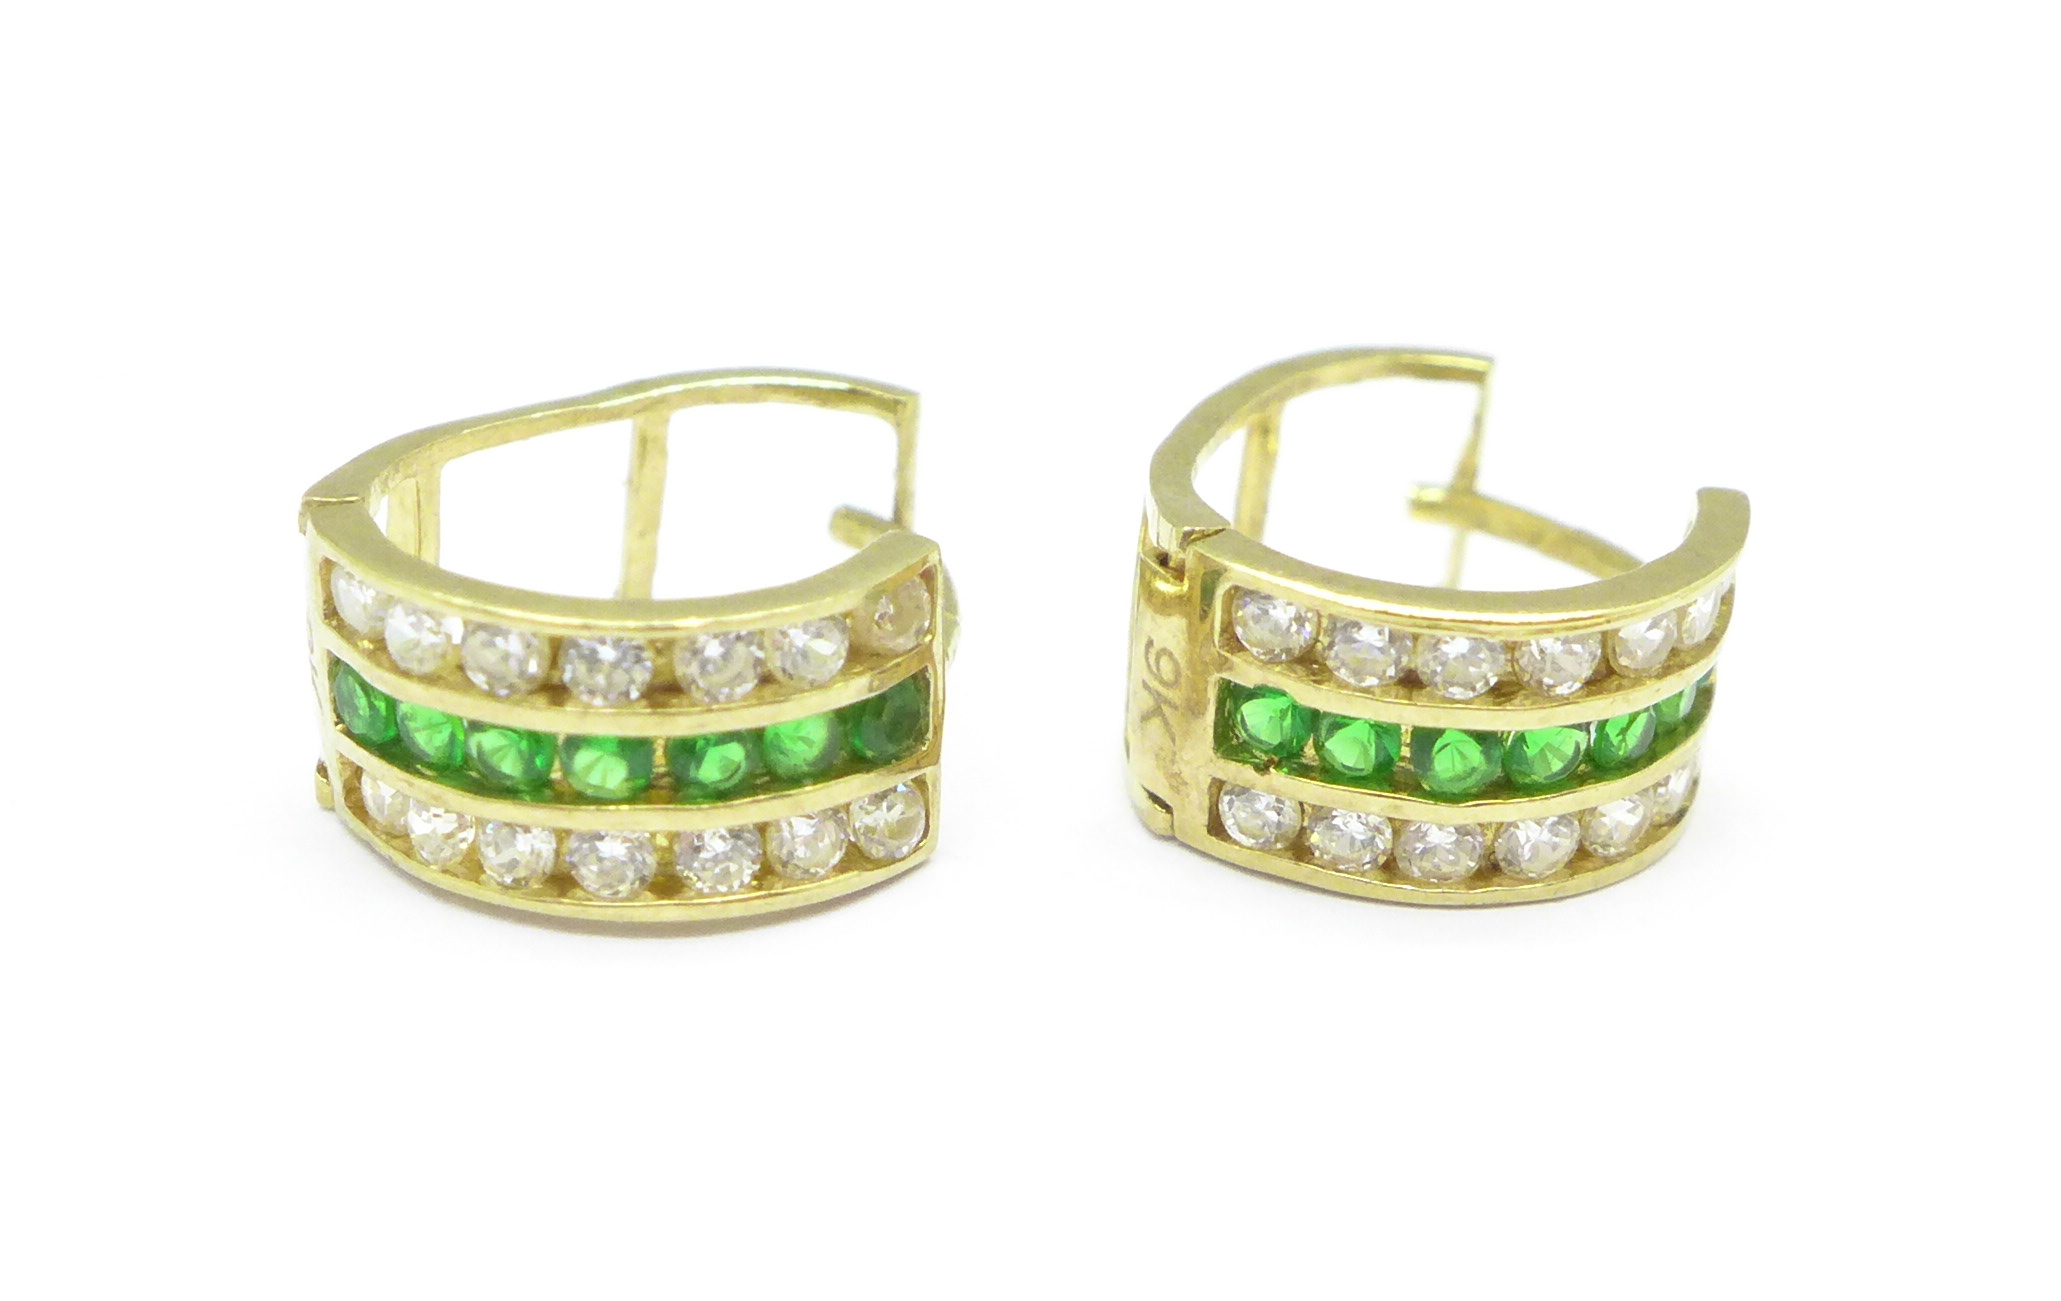 A pair of 9ct gold green and white stone earrings, 1.